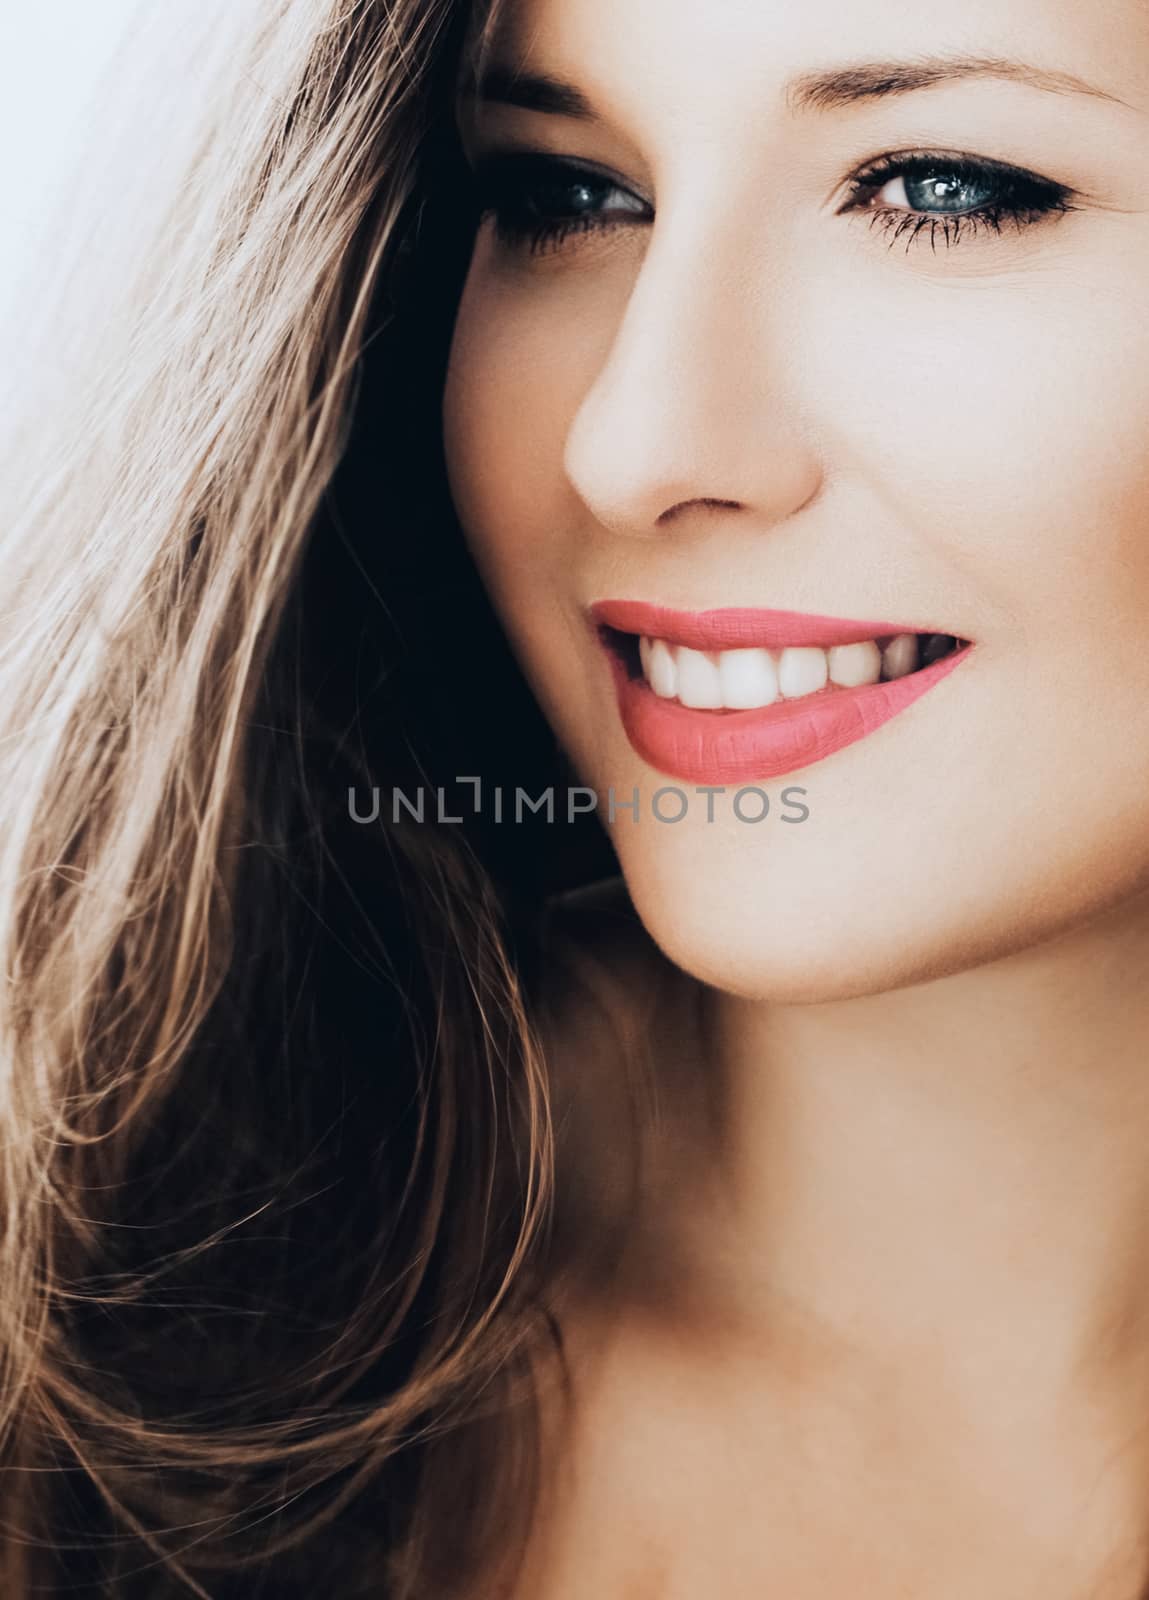 Elegant woman smiling, brunette with long light brown hair, model wearing natural makeup look, female showing healthy white teeth, beauty portrait for cosmetic or lifestyle brands